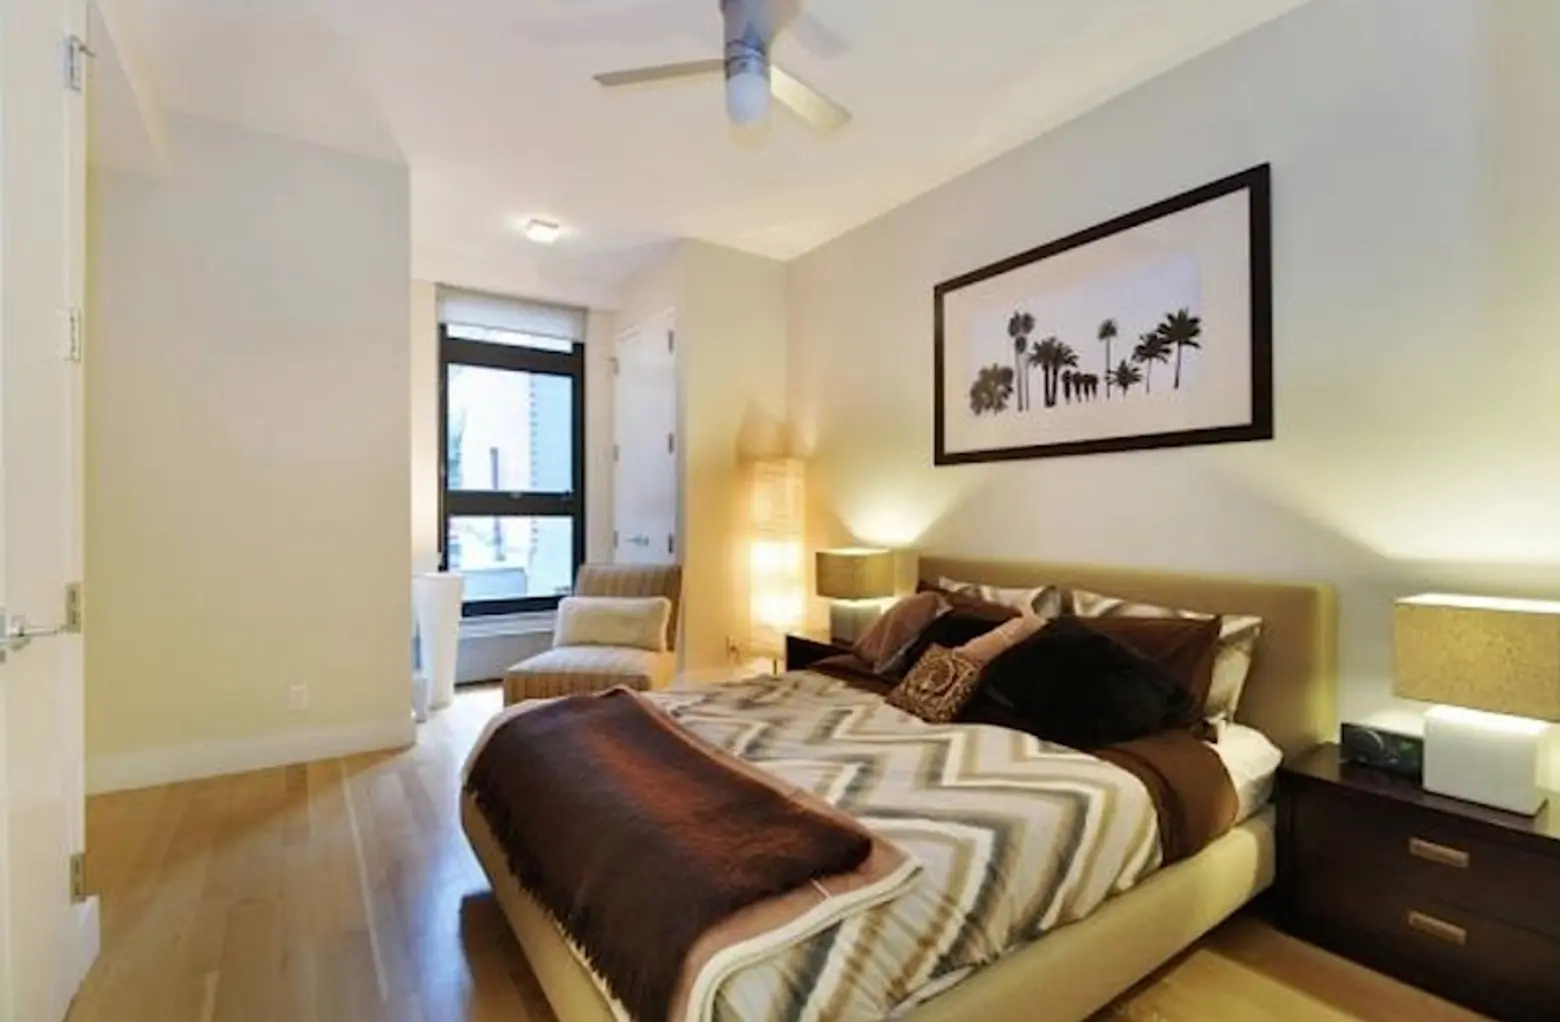 406 West 45th Street #2C, Thorndale Condominium, former carriage house, furnished rent